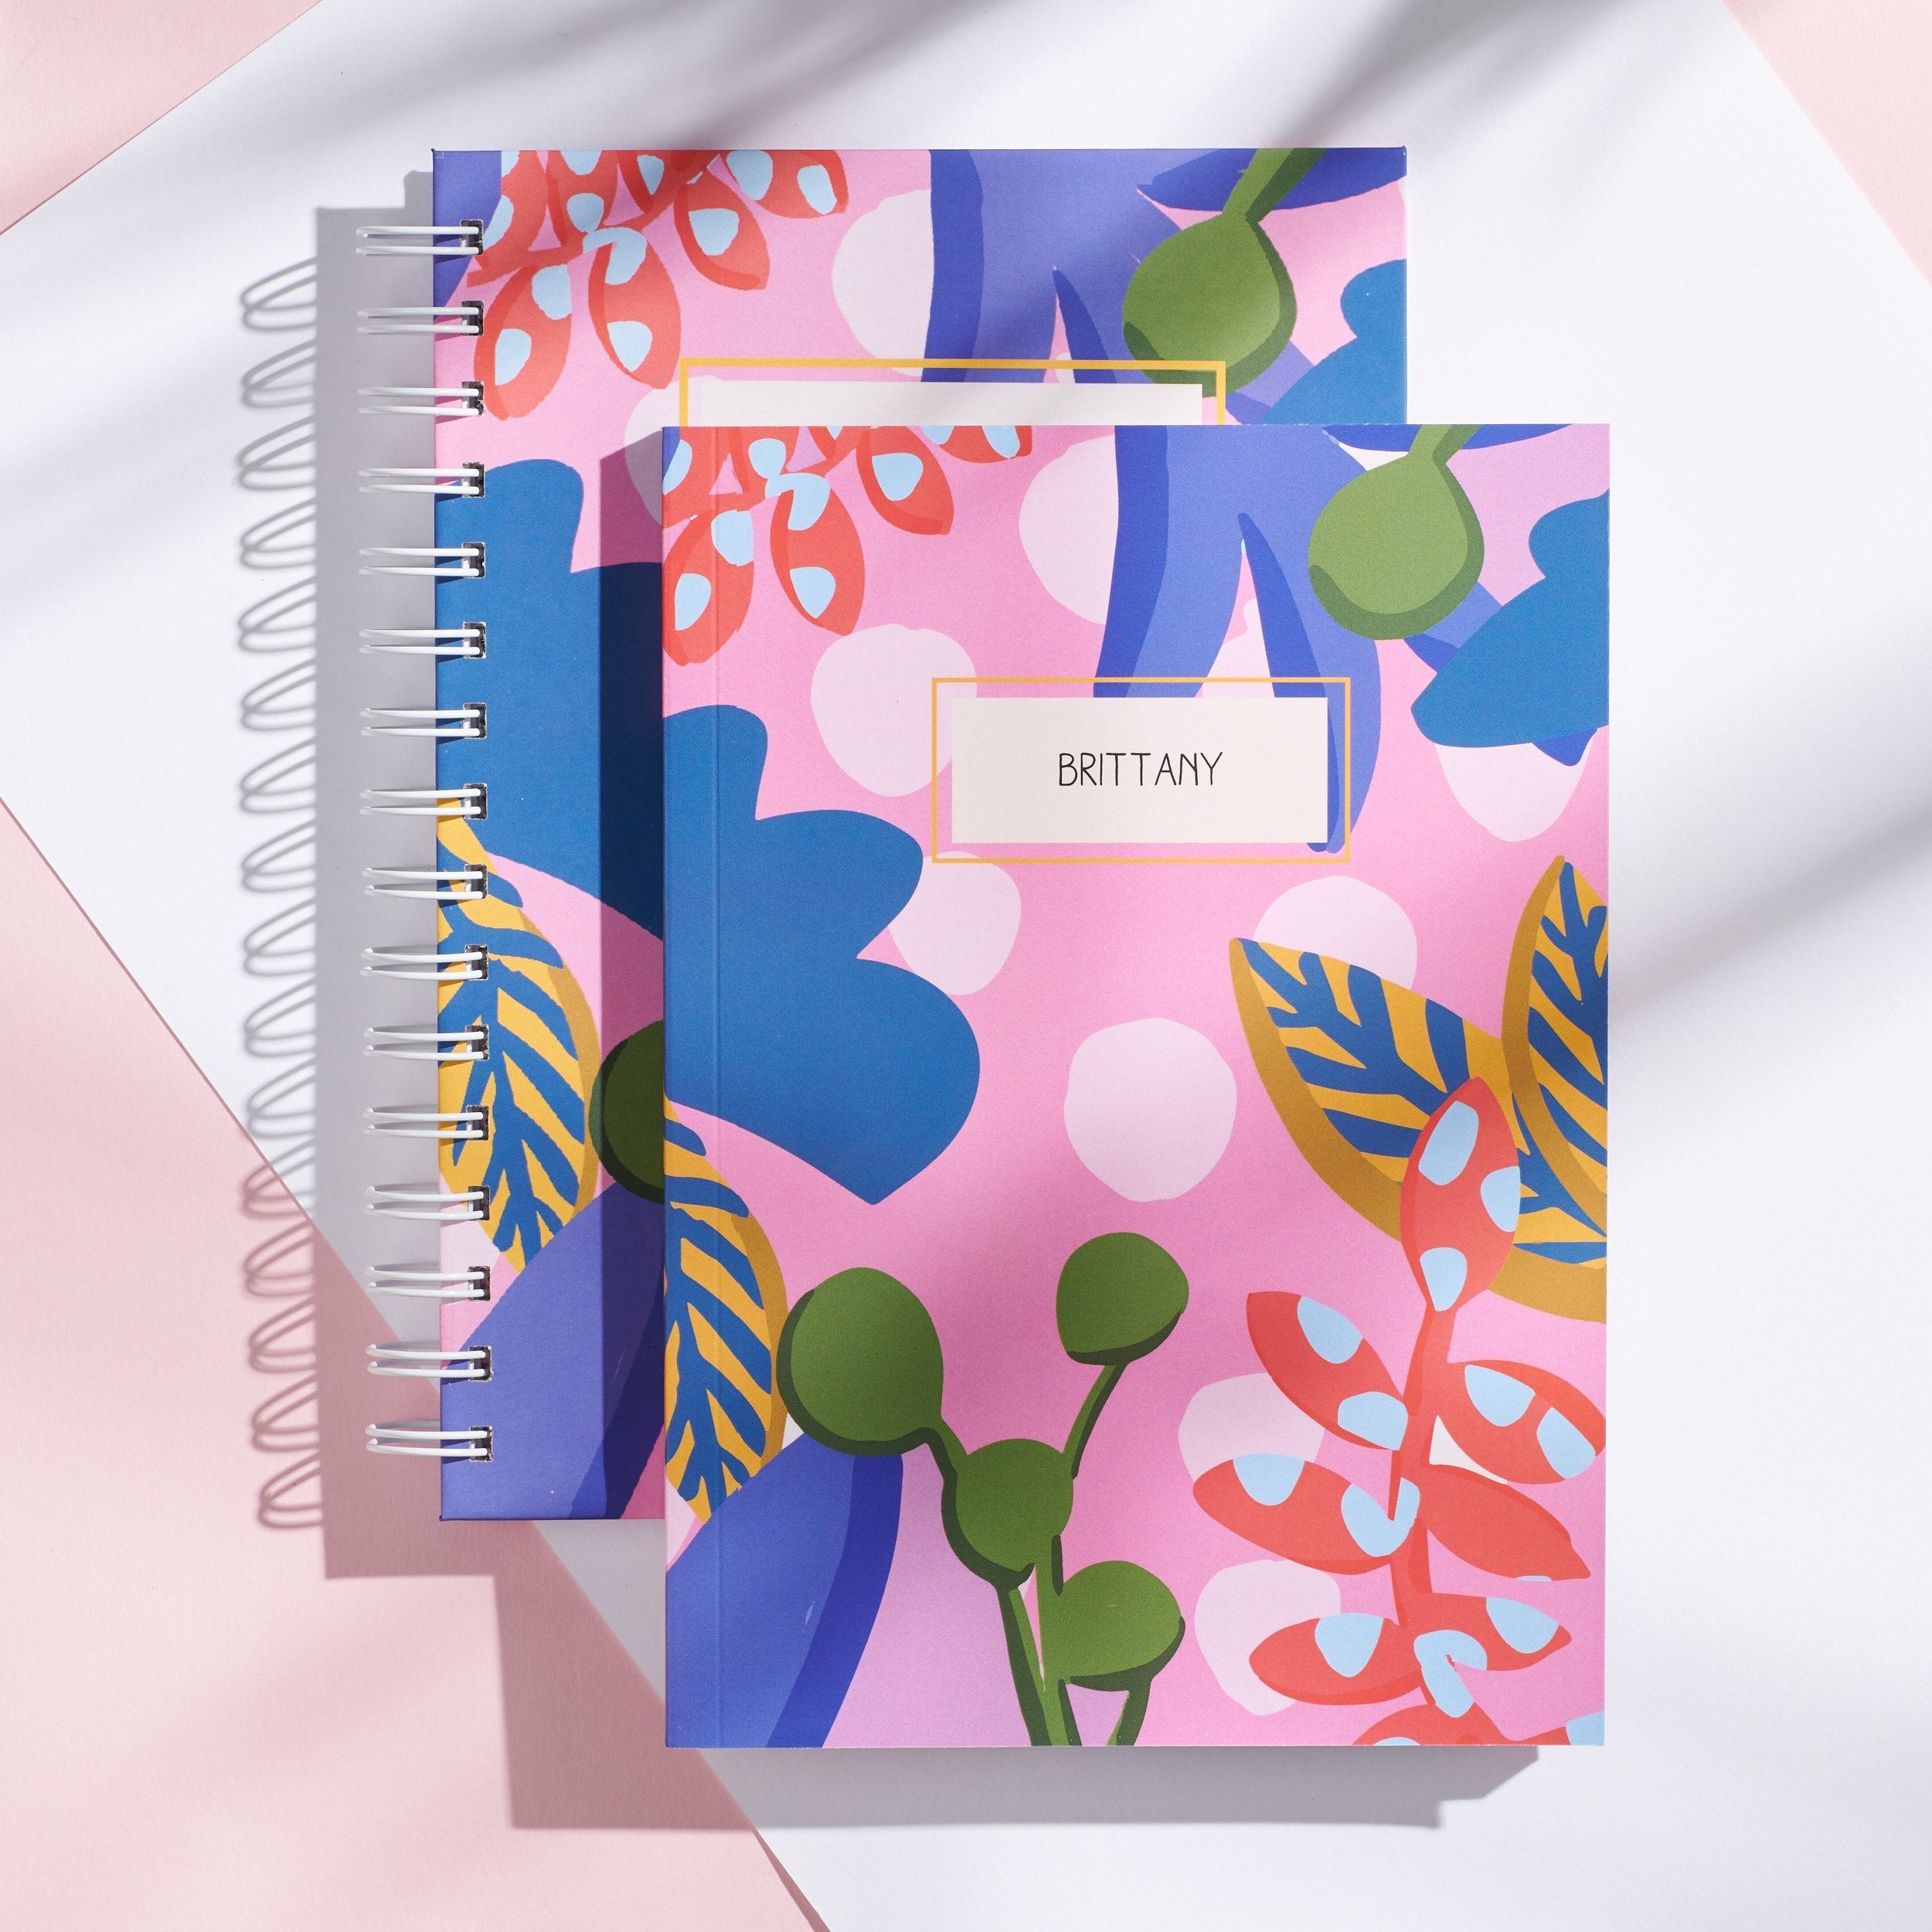 Oakdene Designs Notebooks Personalised Abstract Floral Notebook